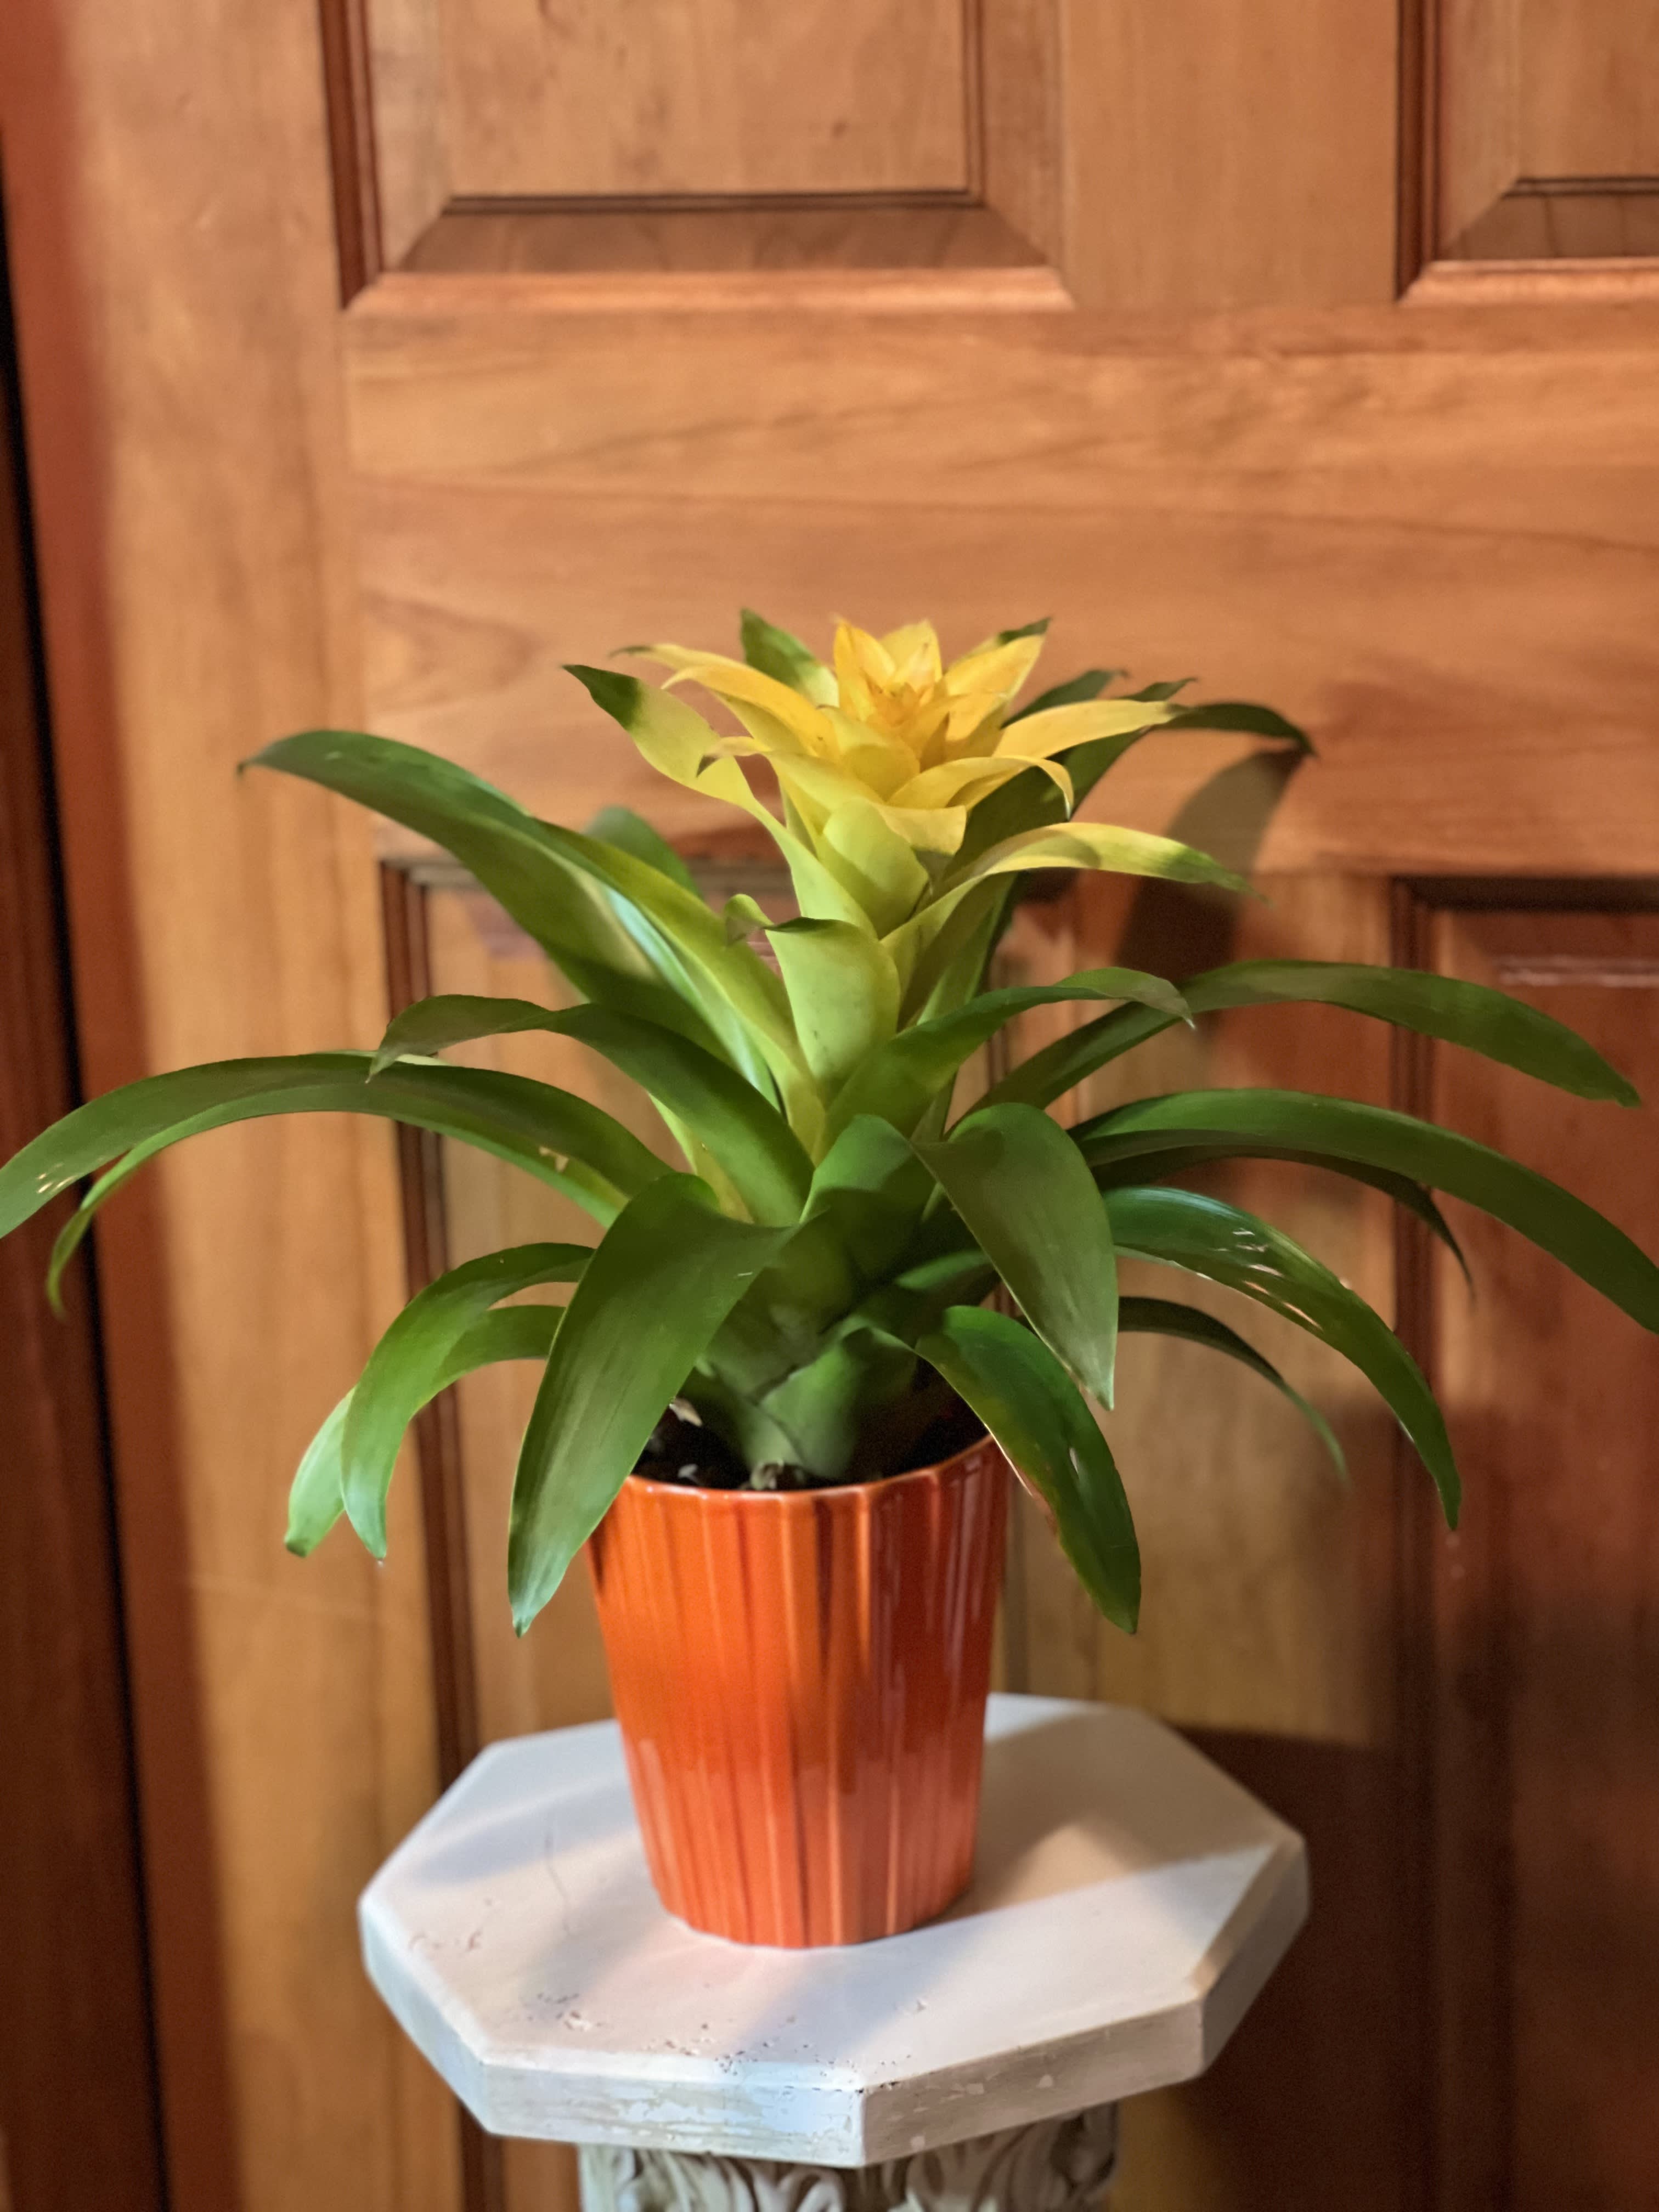 Beaming Bromeliad 6&quot; Pot (Pet friendly) - Long lasting Bromeliad plant. Averages 8&quot; tall. Easy to care for, durable plant. Keep water in central leaf &quot;cups&quot;.  Grows in medium light. Enjoys average home or office temperatures. Bromeliads show their color in their central leaves near the top of the plant. (plant may vary from one shown) After its color has faded, watch for pups to form near the mother plants inside the &quot;cups&quot;, normally, you will find 2-3 baby pups per mother plant. Once they are 1/2 the size of the mother plant, remove carefully and transplant into another pot to keep or give away. 